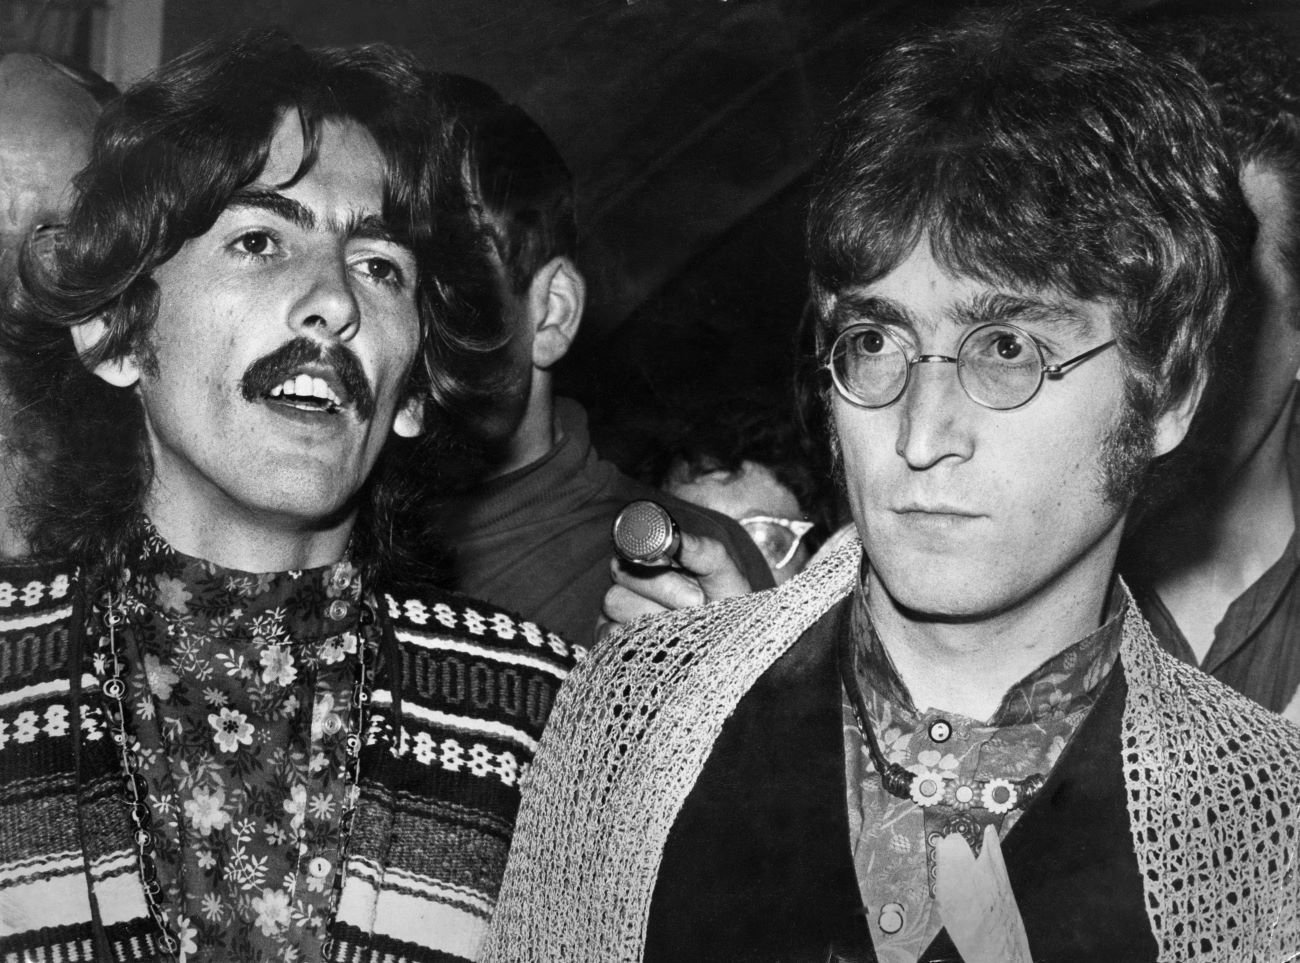 A black and white picture of George Harrison and John Lennon walking through a crowd.